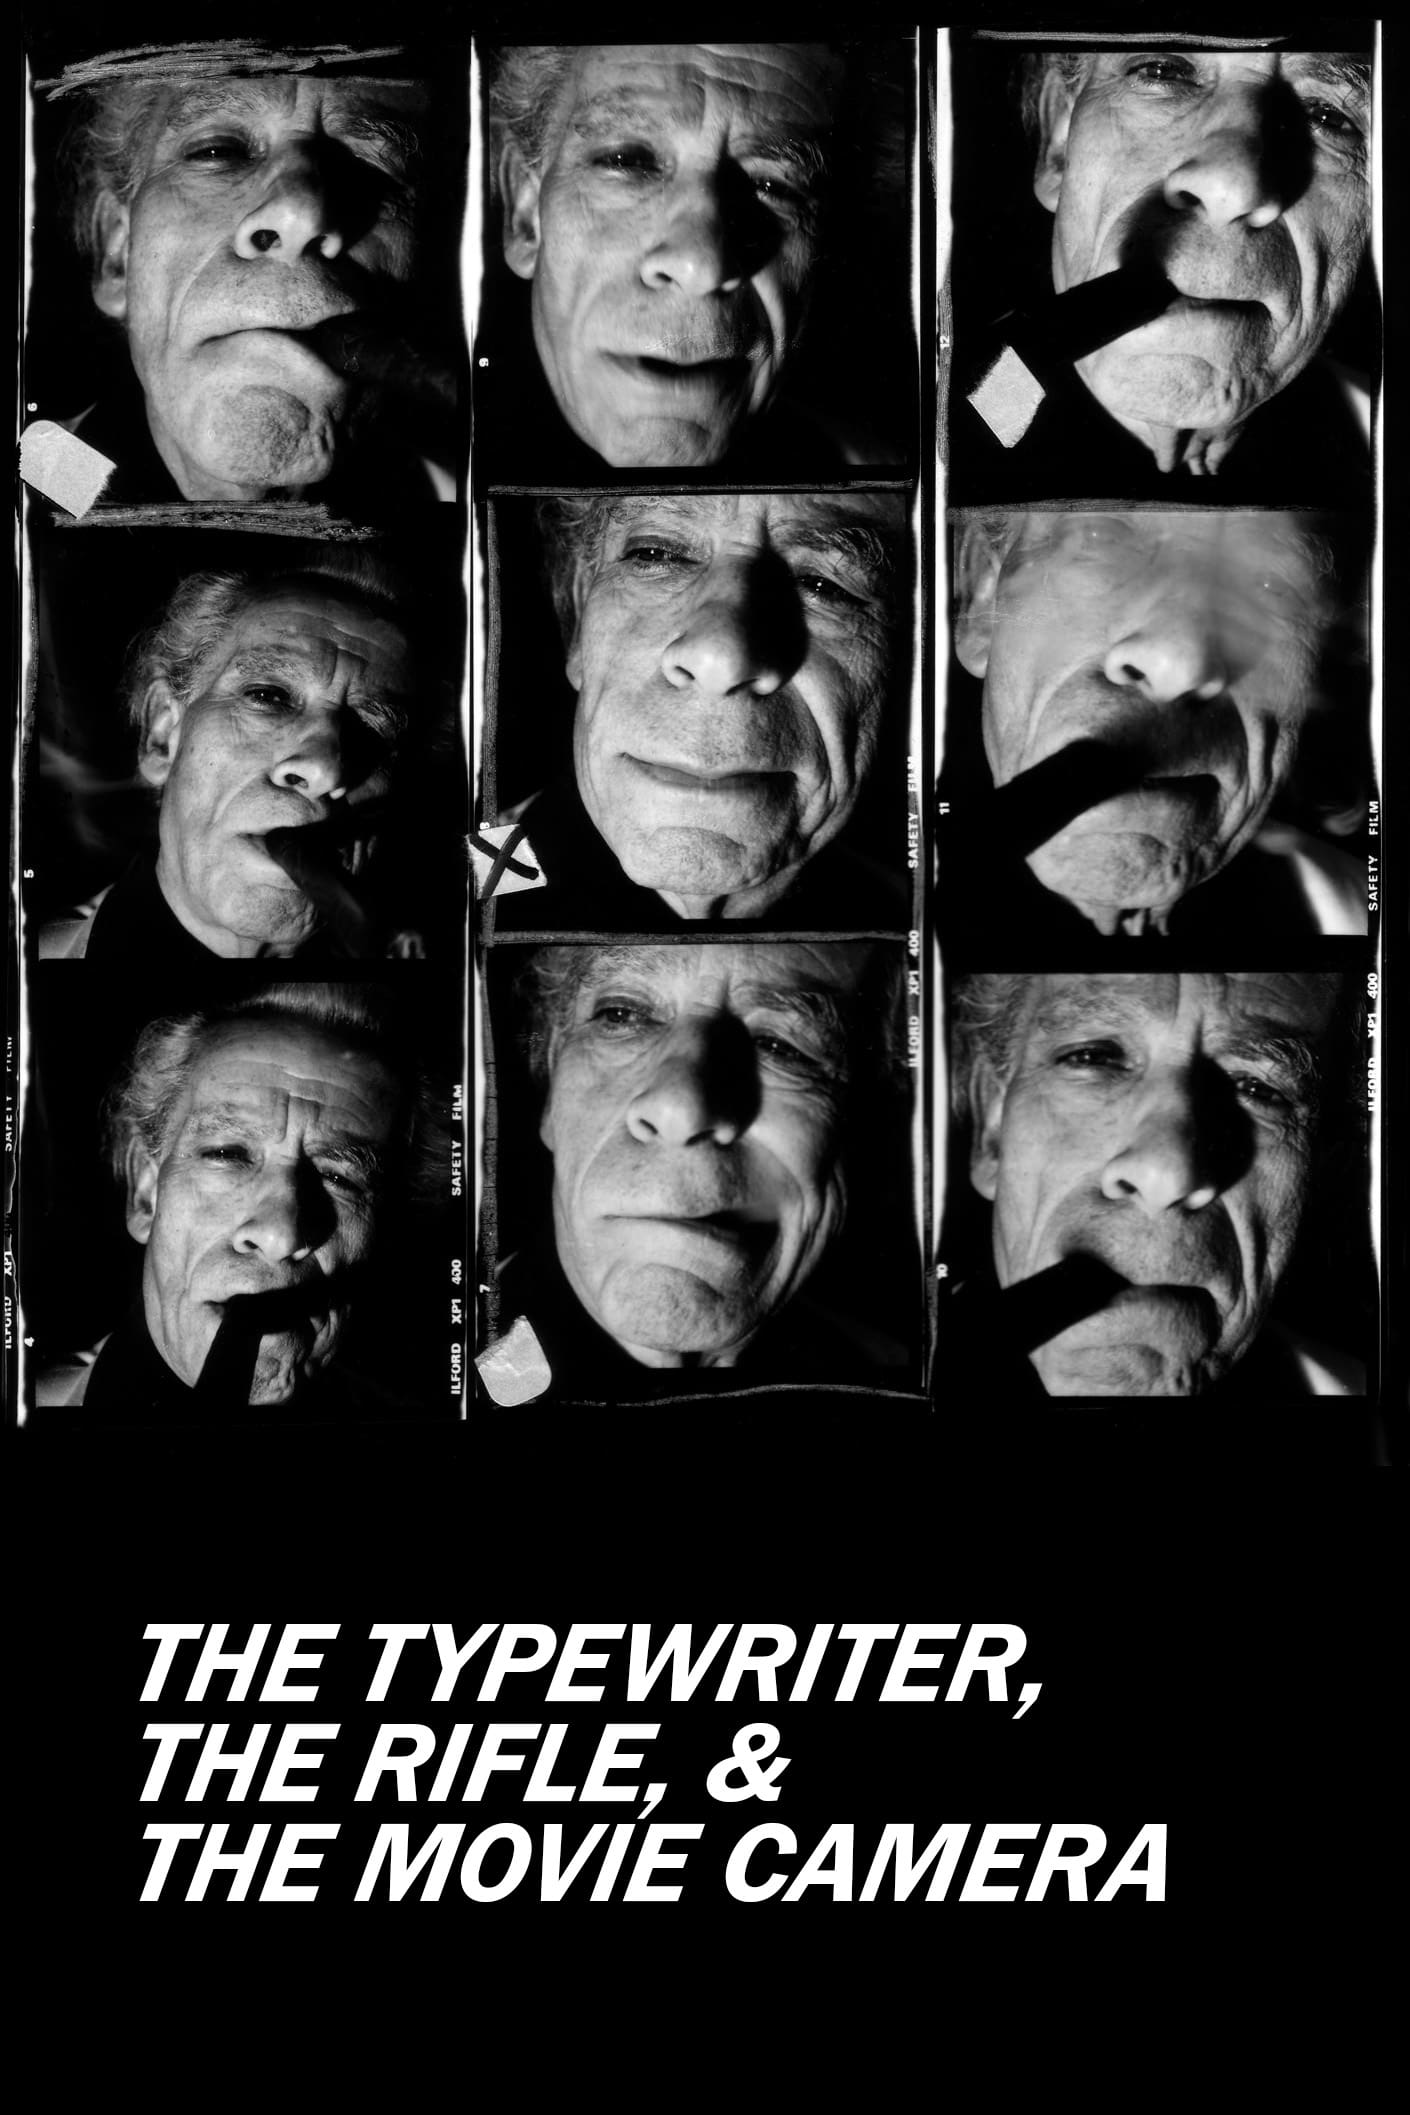 The Typewriter, the Rifle & the Movie Camera (1996)